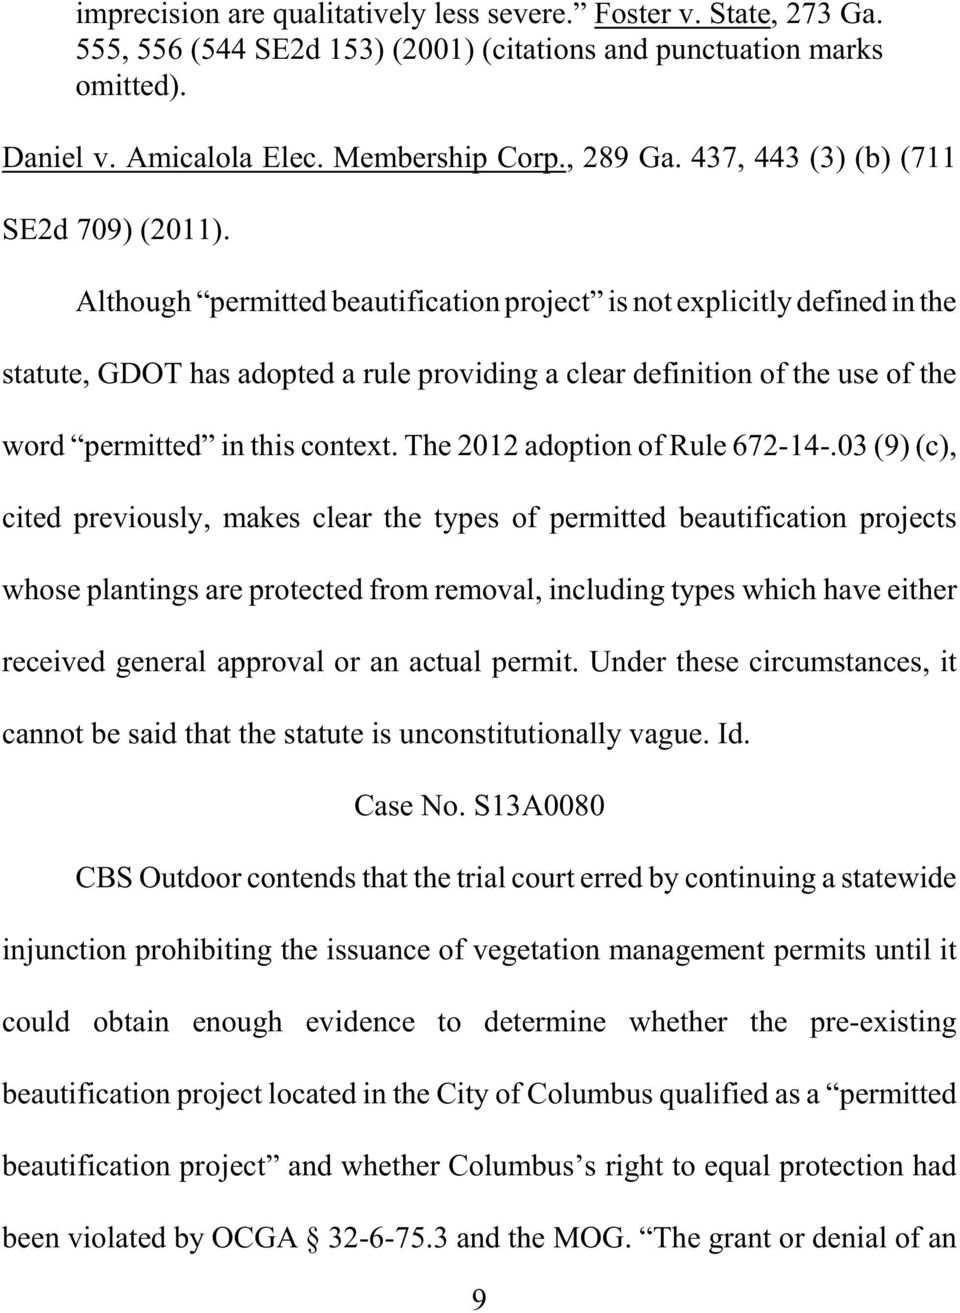 Although permitted beautification project is not explicitly defined in the statute, GDOT has adopted a rule providing a clear definition of the use of the word permitted in this context.